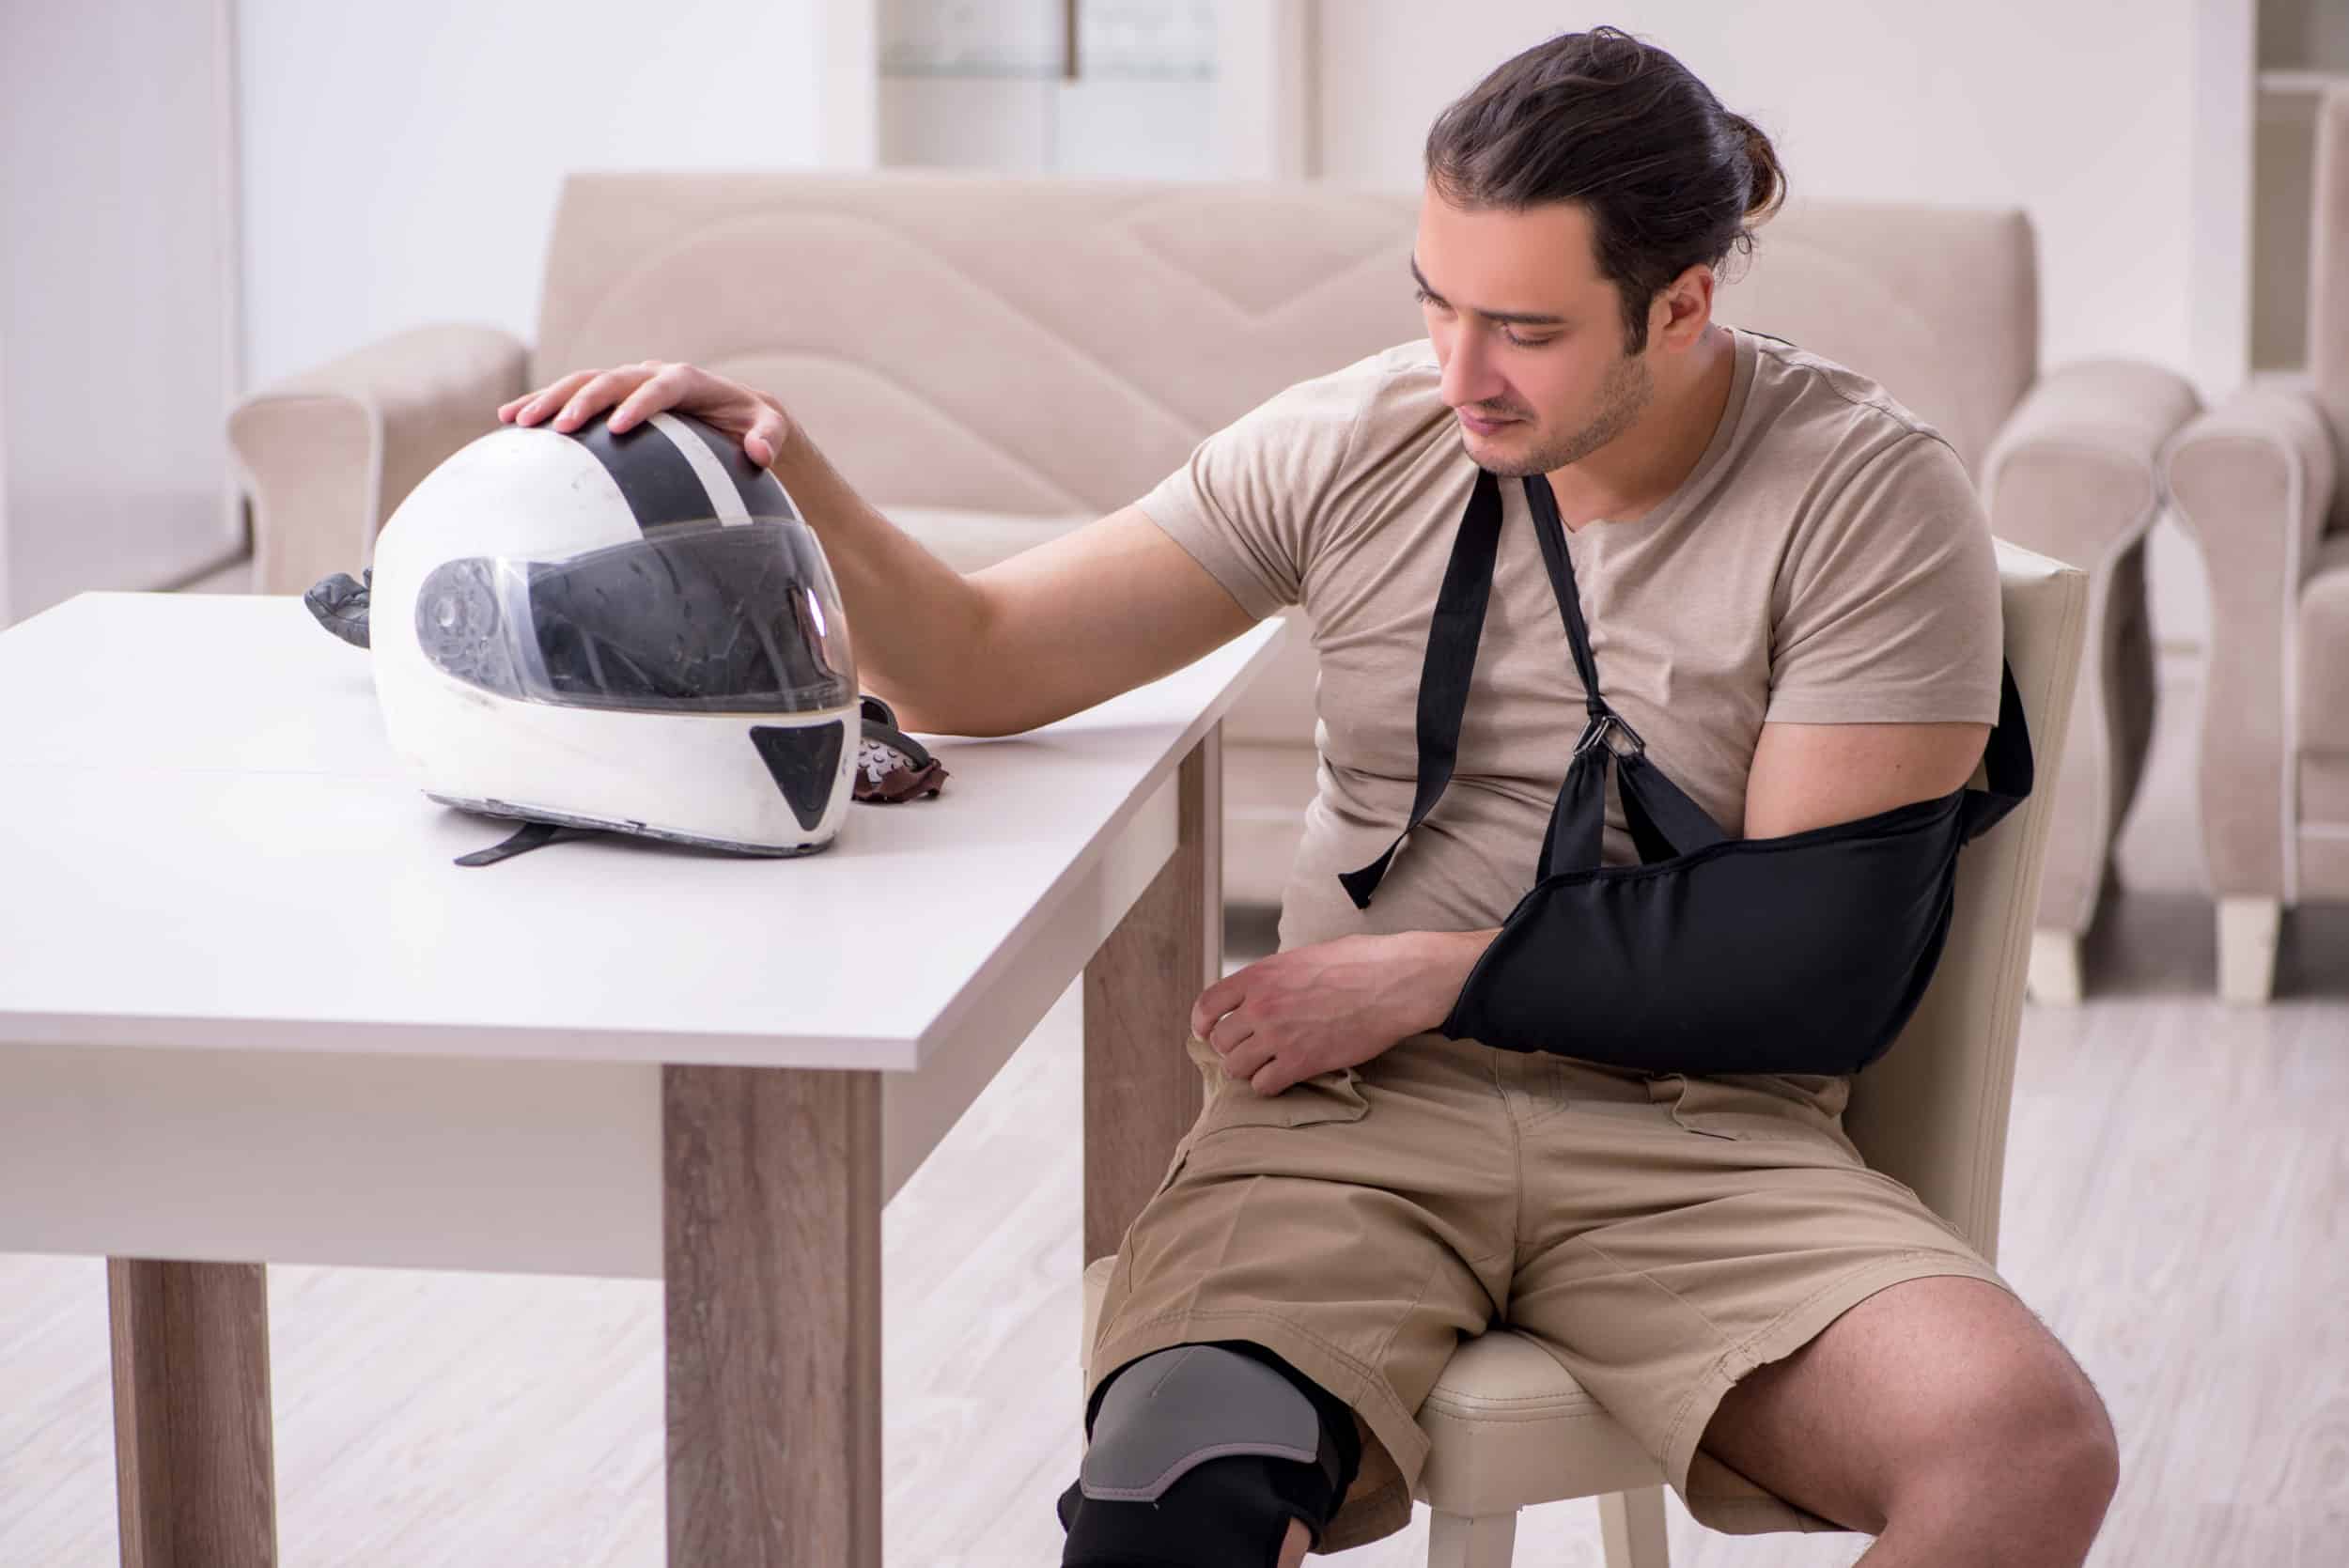 Injured person looking at a motorcycle helmet